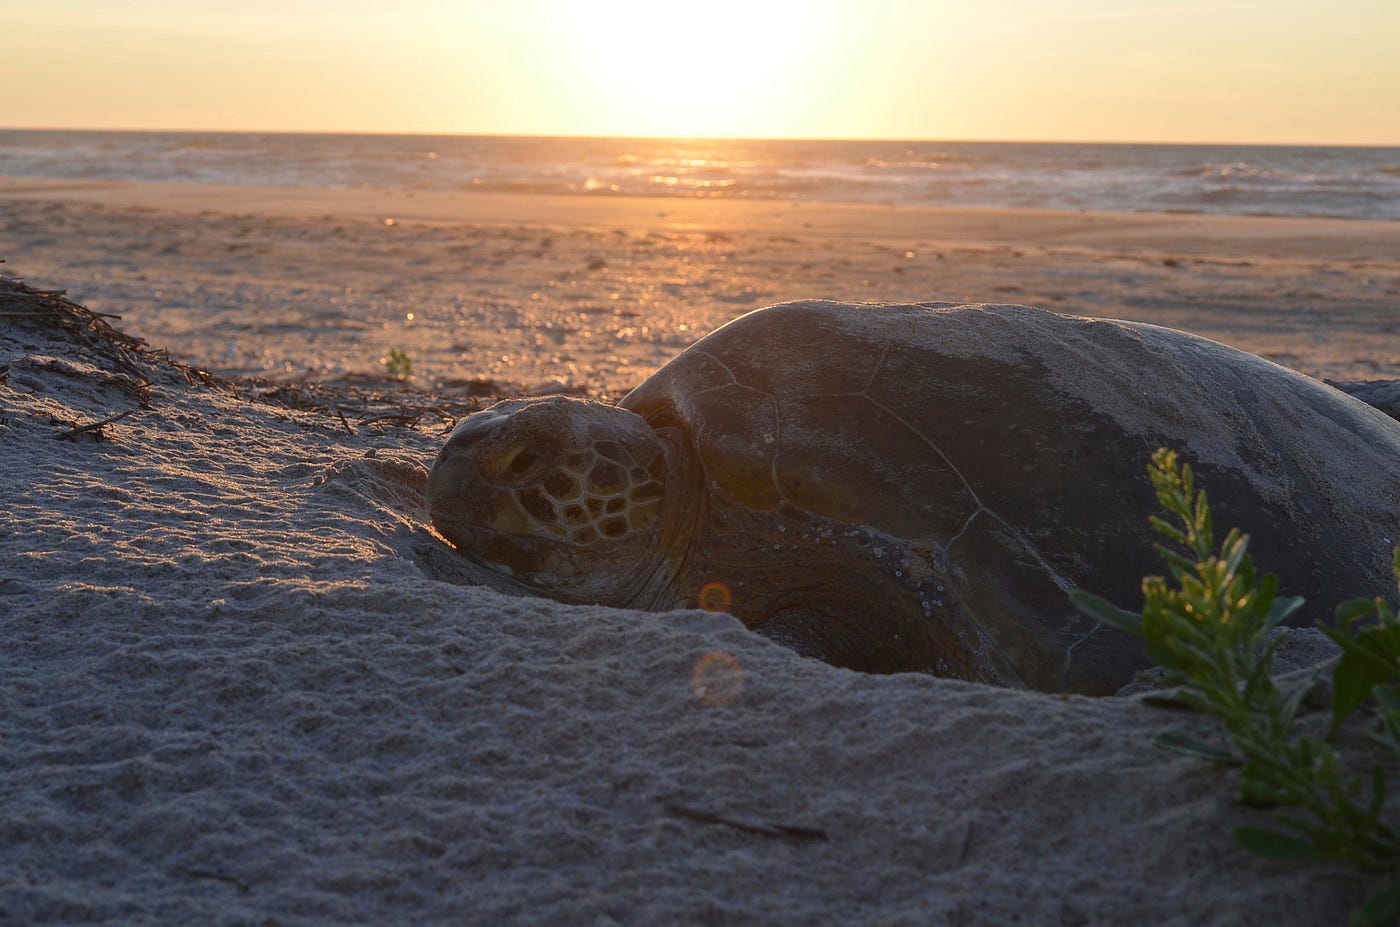 What You Can Do to Help Sea Turtles, by U.S. Fish and Wildlife Service, Updates from the U.S. Fish and Wildlife Service